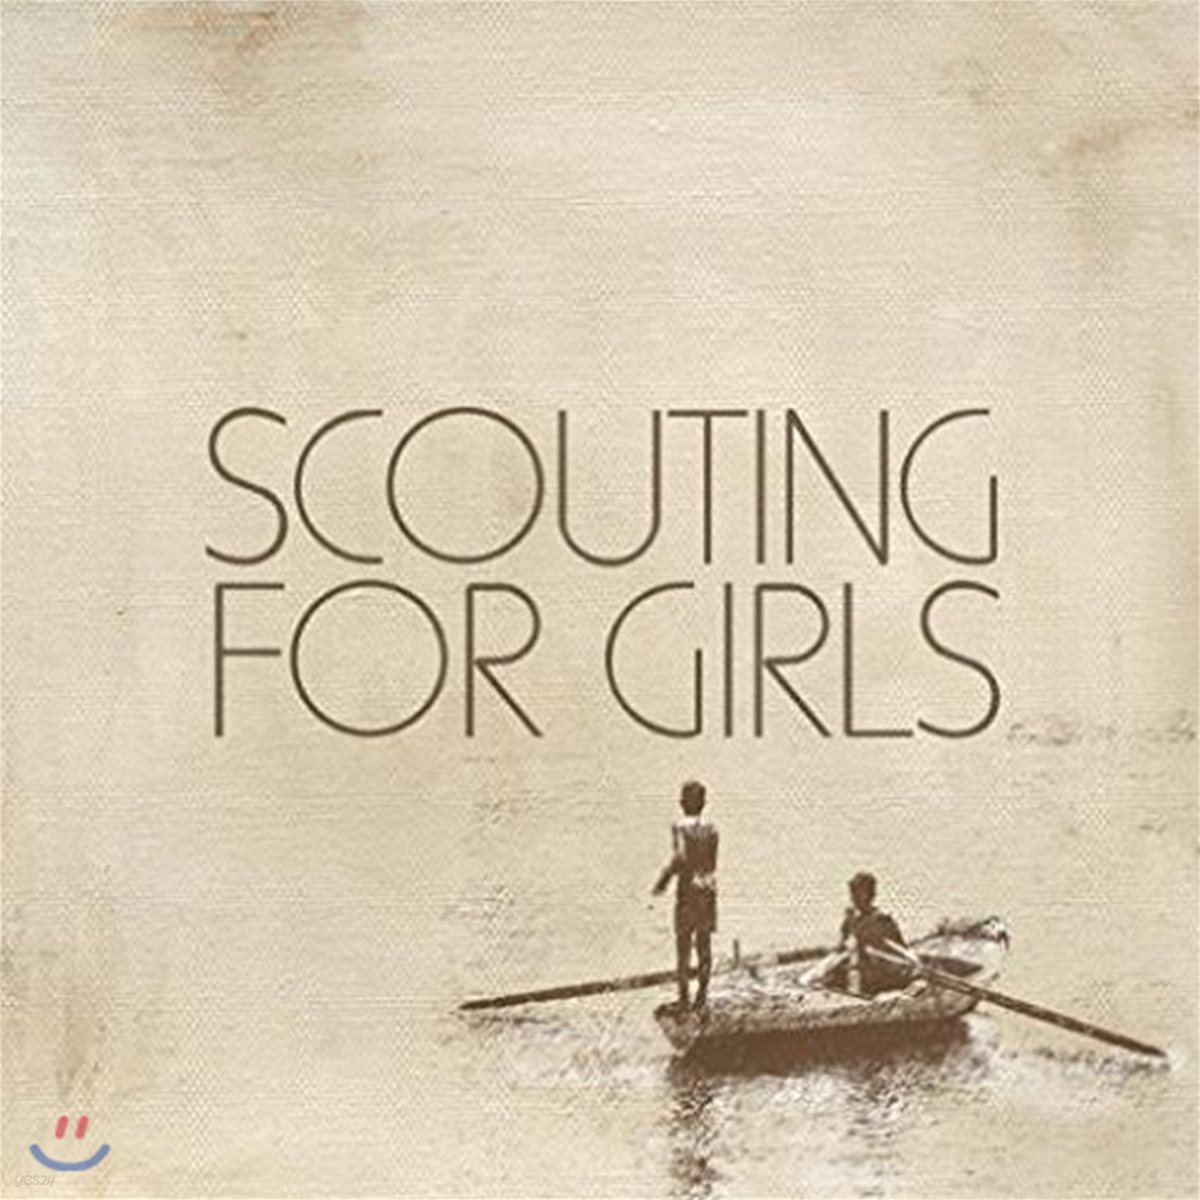 Scouting For Girls (스카우팅 포 걸즈) - Scouting For Girls [10th Anniversary Edition]